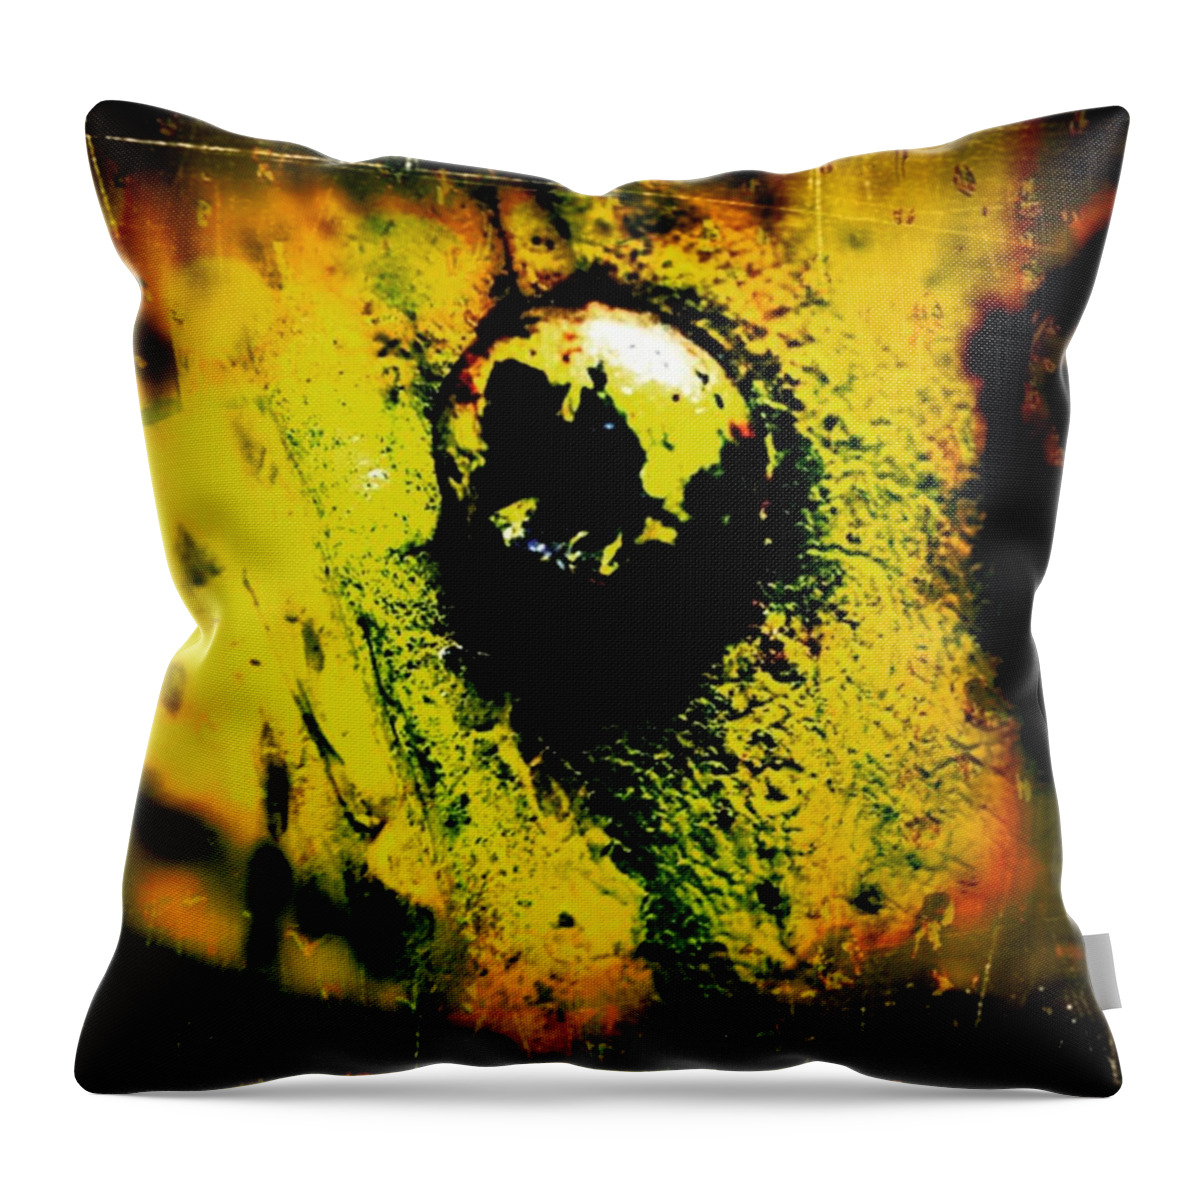 Beautiful Throw Pillow featuring the photograph #abstract #art #abstractart #45 by Jason Roust